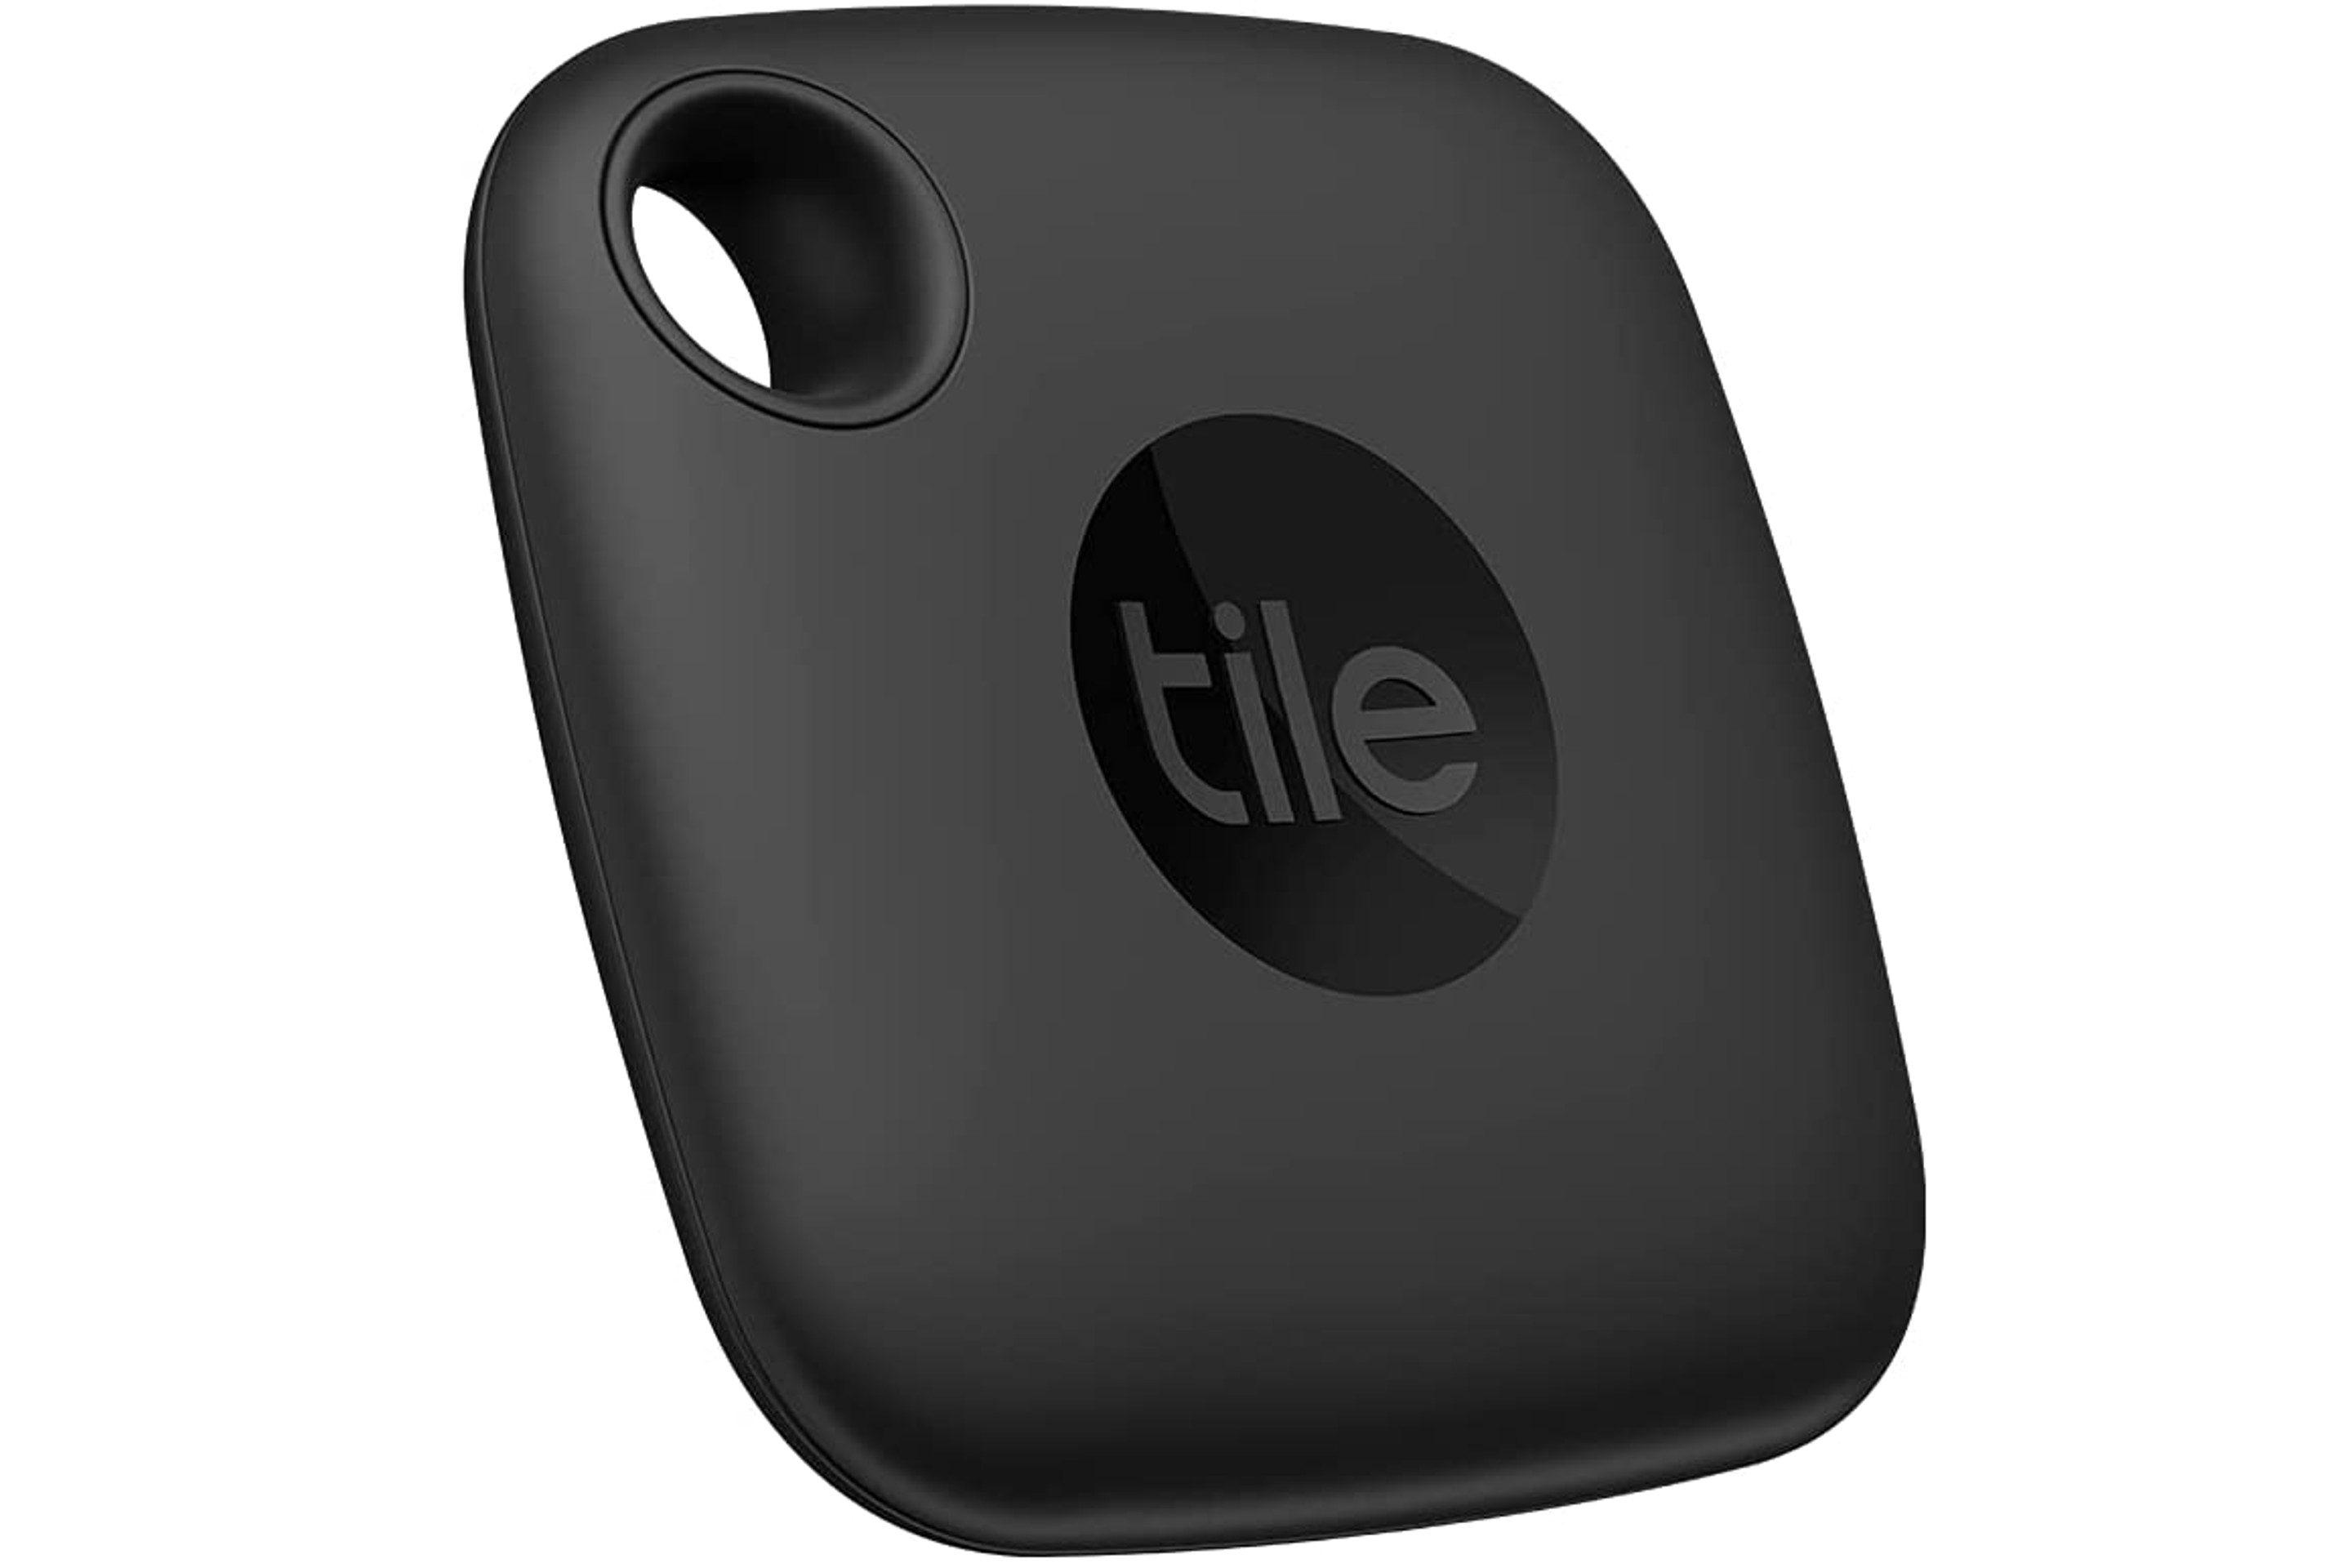 Tile Mate Bluetooth Tracker and Key Finder